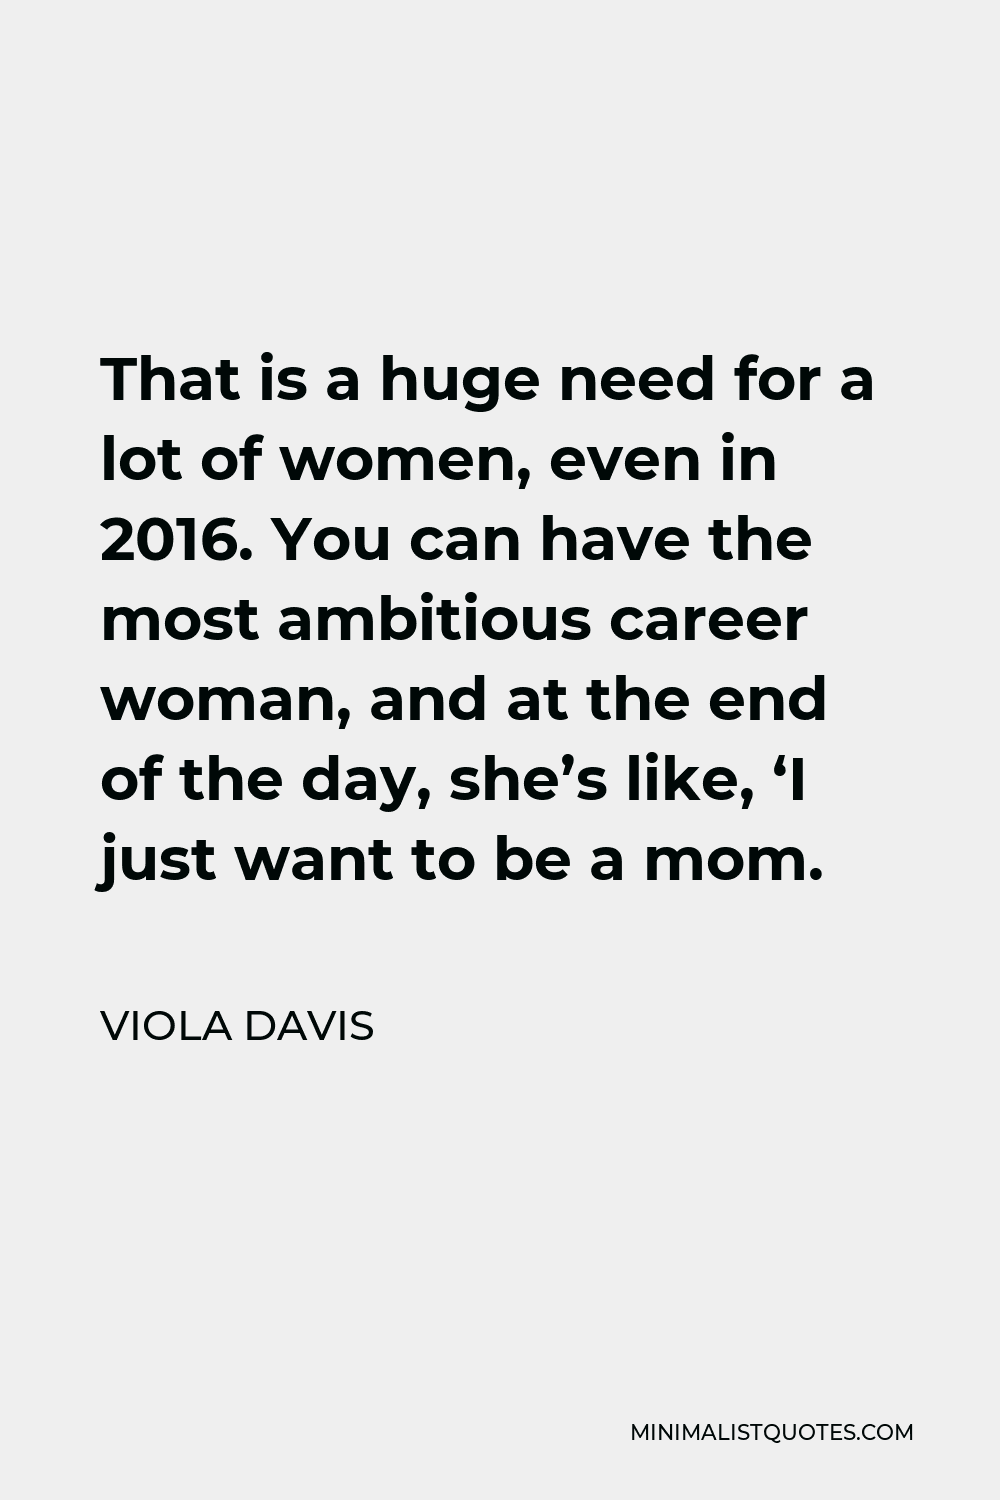 Viola Davis Quote - That is a huge need for a lot of women, even in 2016. You can have the most ambitious career woman, and at the end of the day, she’s like, ‘I just want to be a mom.